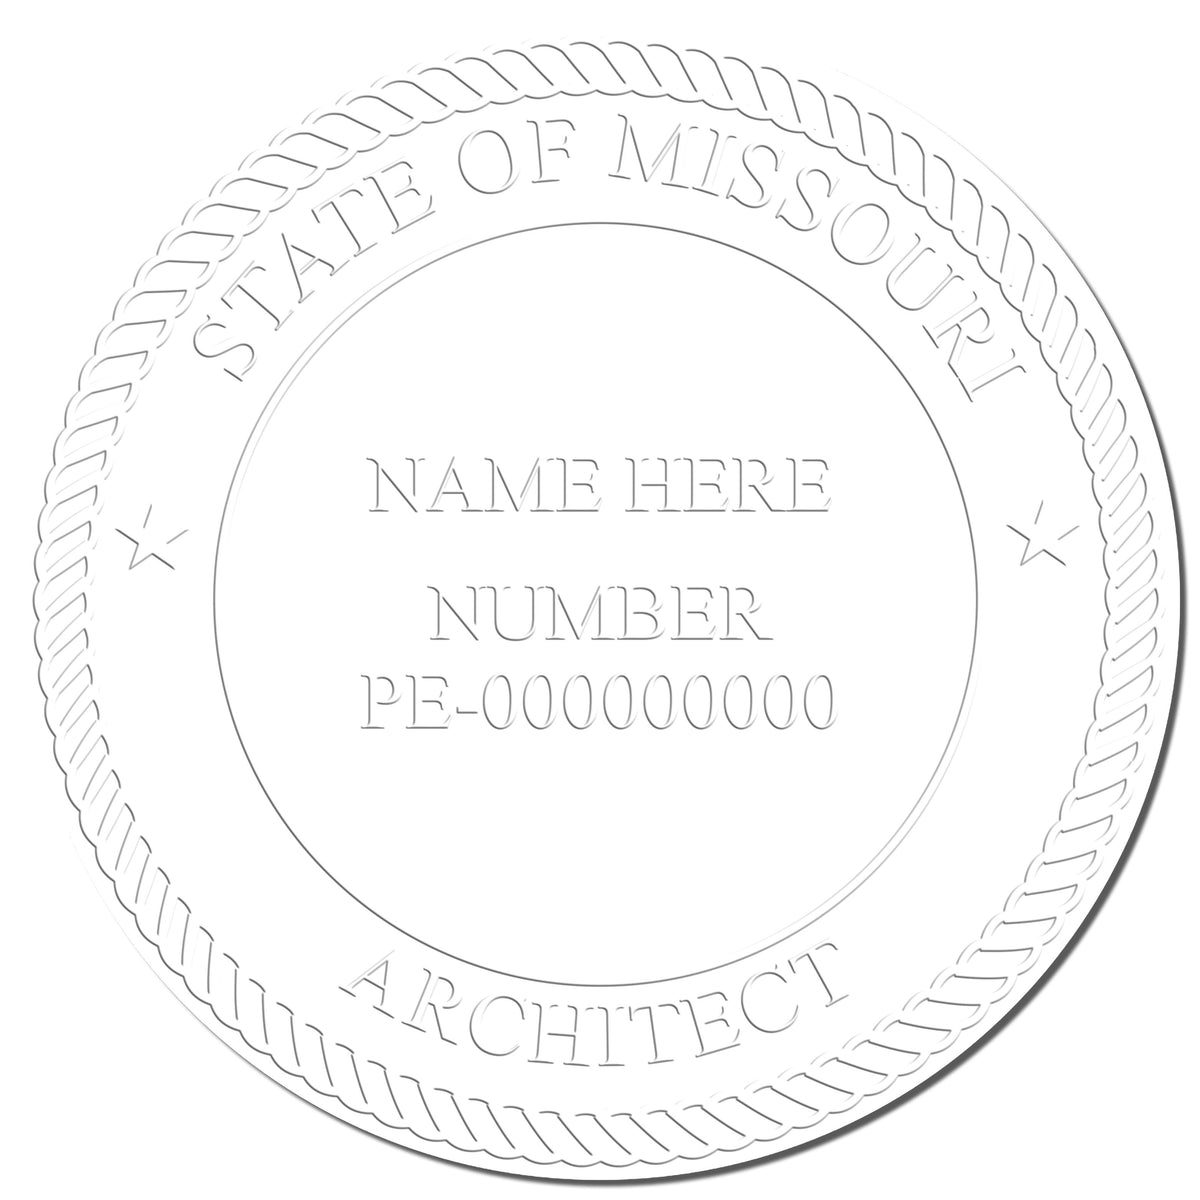 This paper is stamped with a sample imprint of the Gift Missouri Architect Seal, signifying its quality and reliability.